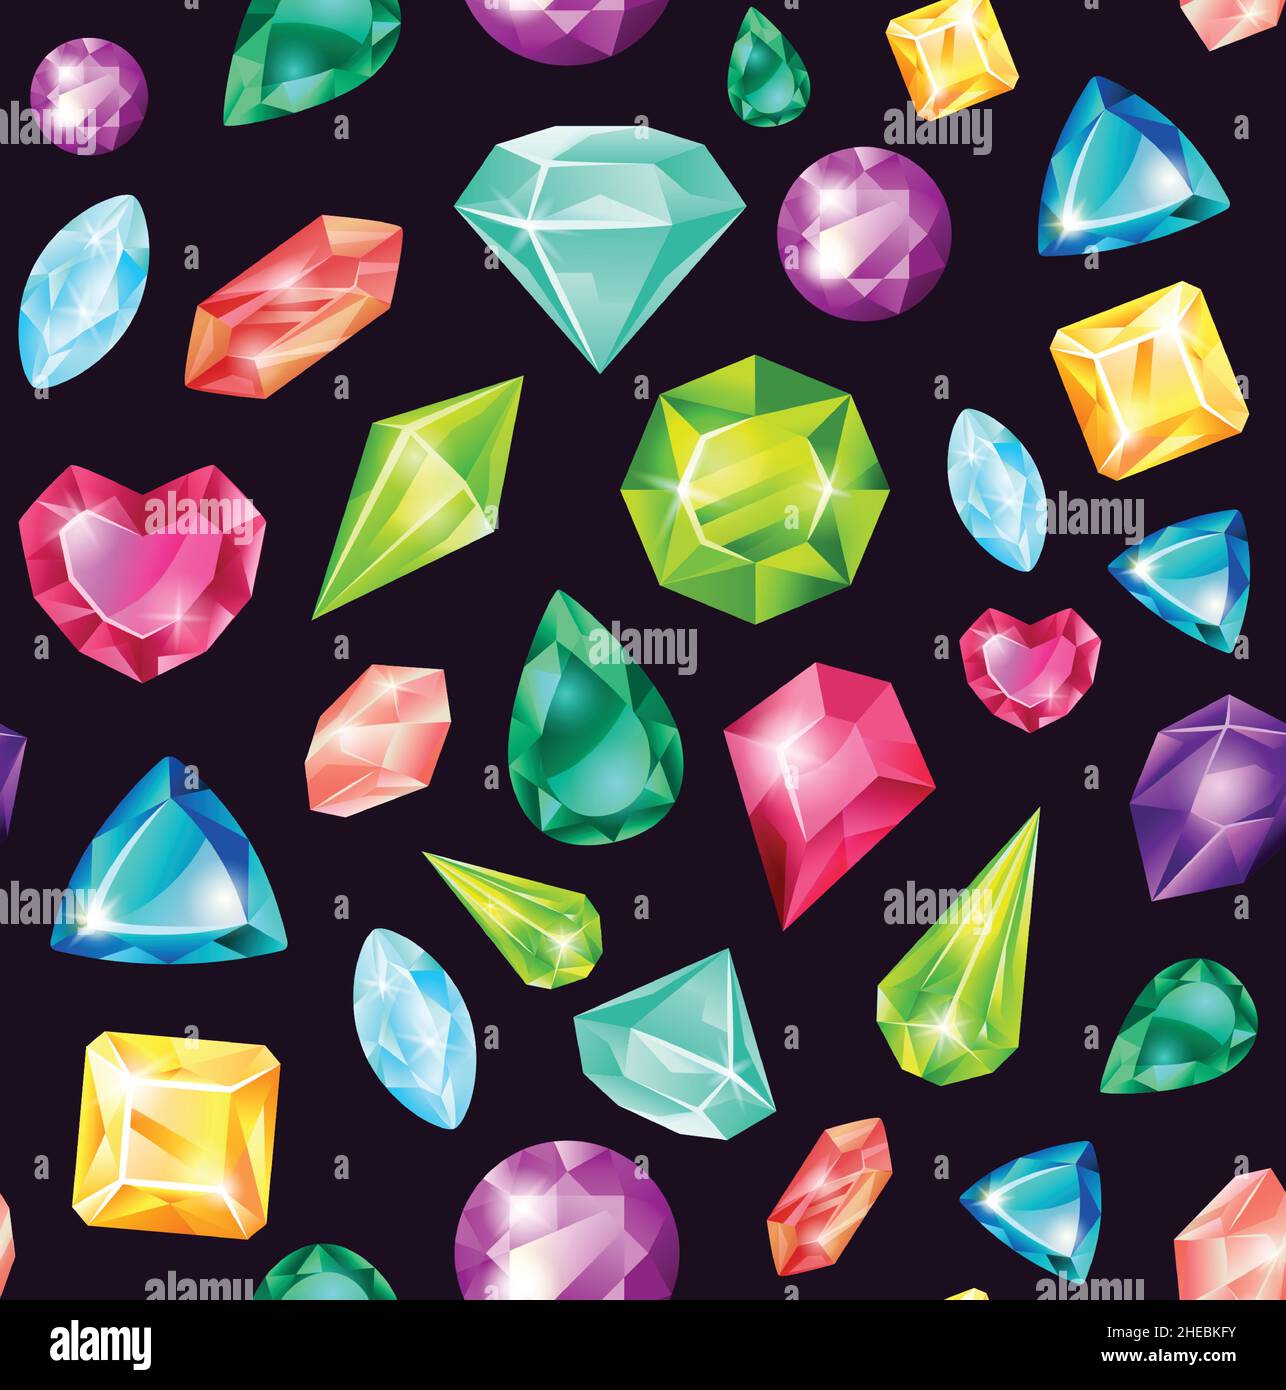 Cartoon magic crystals and precious gemstones seamless pattern. Colorful jewelry crystal, diamond gems, shiny jewel stones vector background. Fantasy shiny jewelry texture or textile Stock Vector